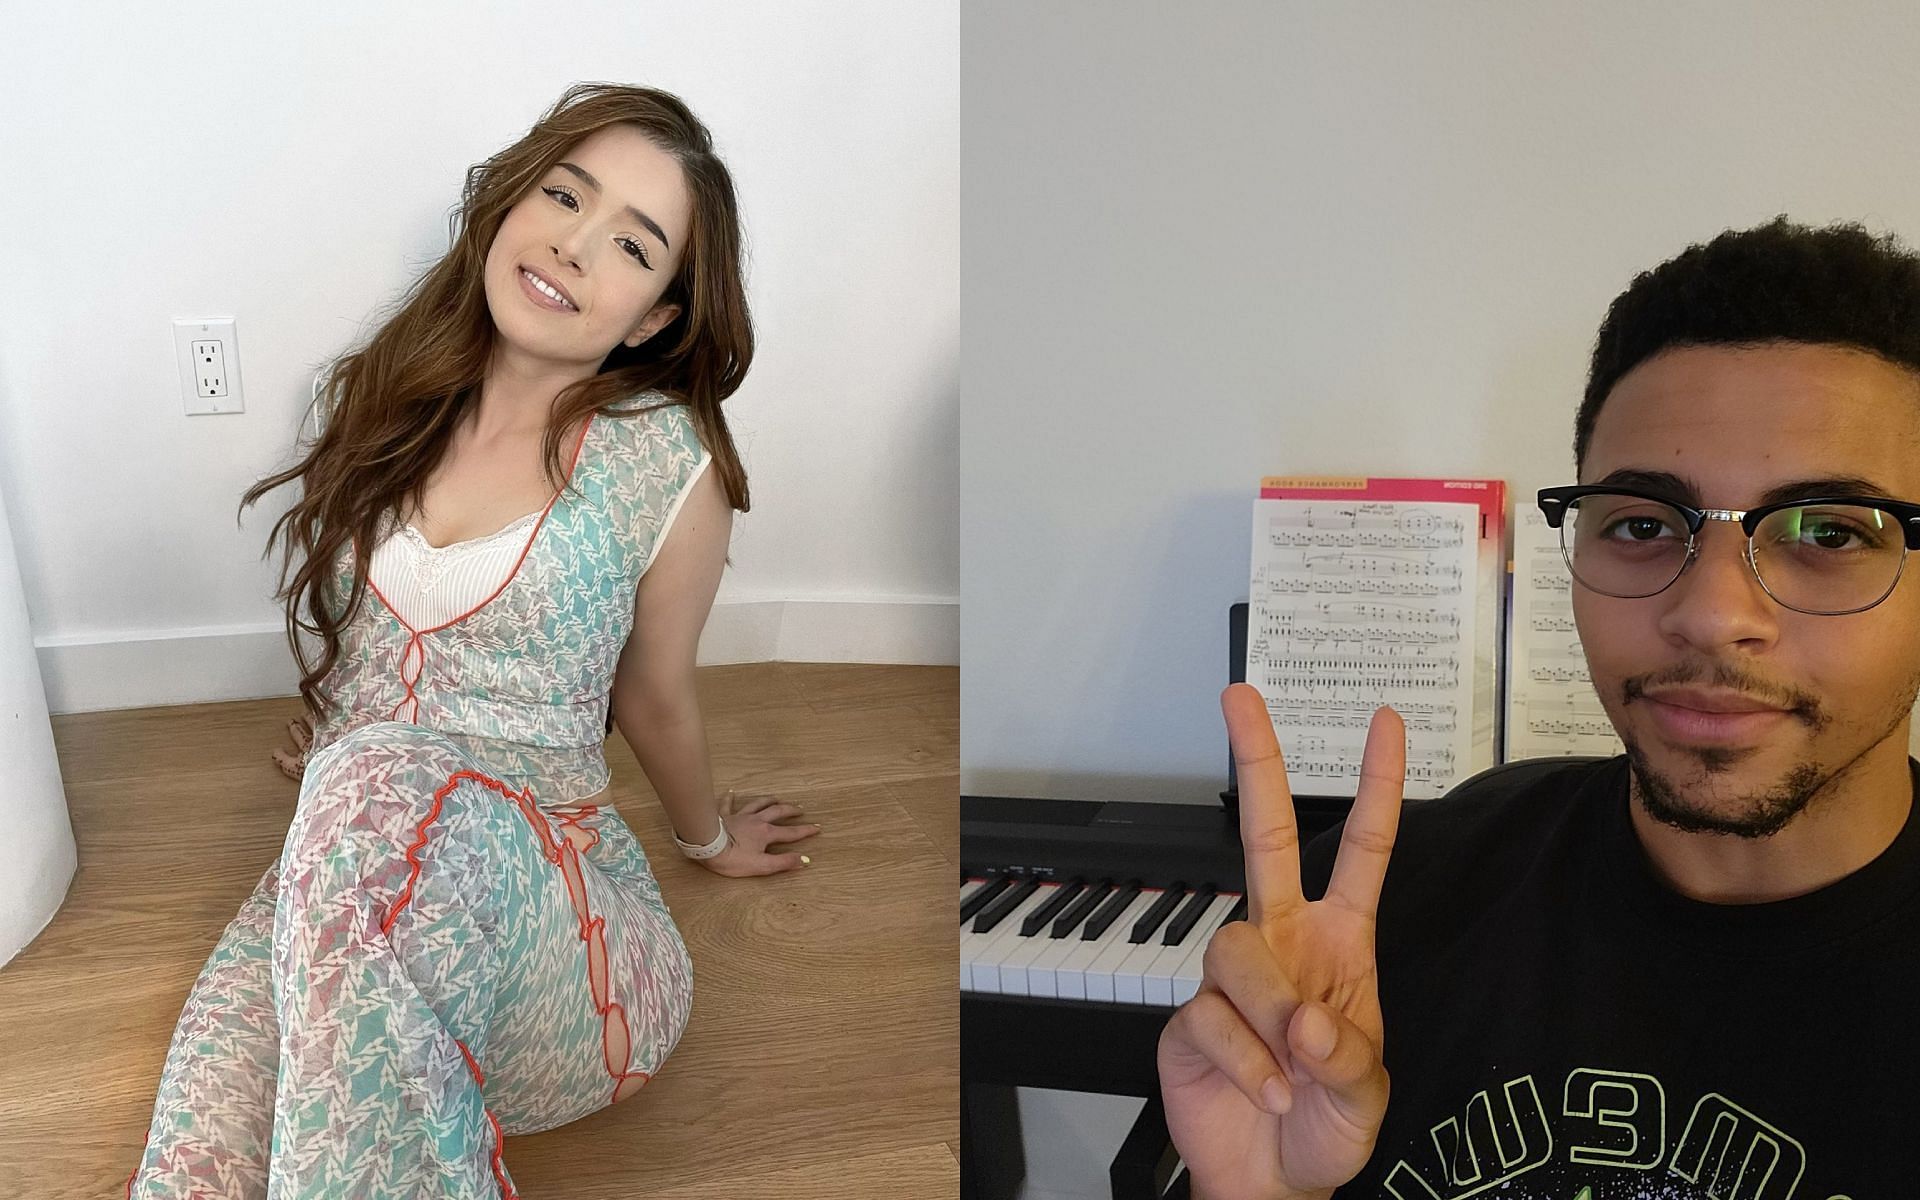 &ldquo;I was so surprised!&rdquo; - Pokimane reacts to Myth moving to YouTube Gaming and provides her take